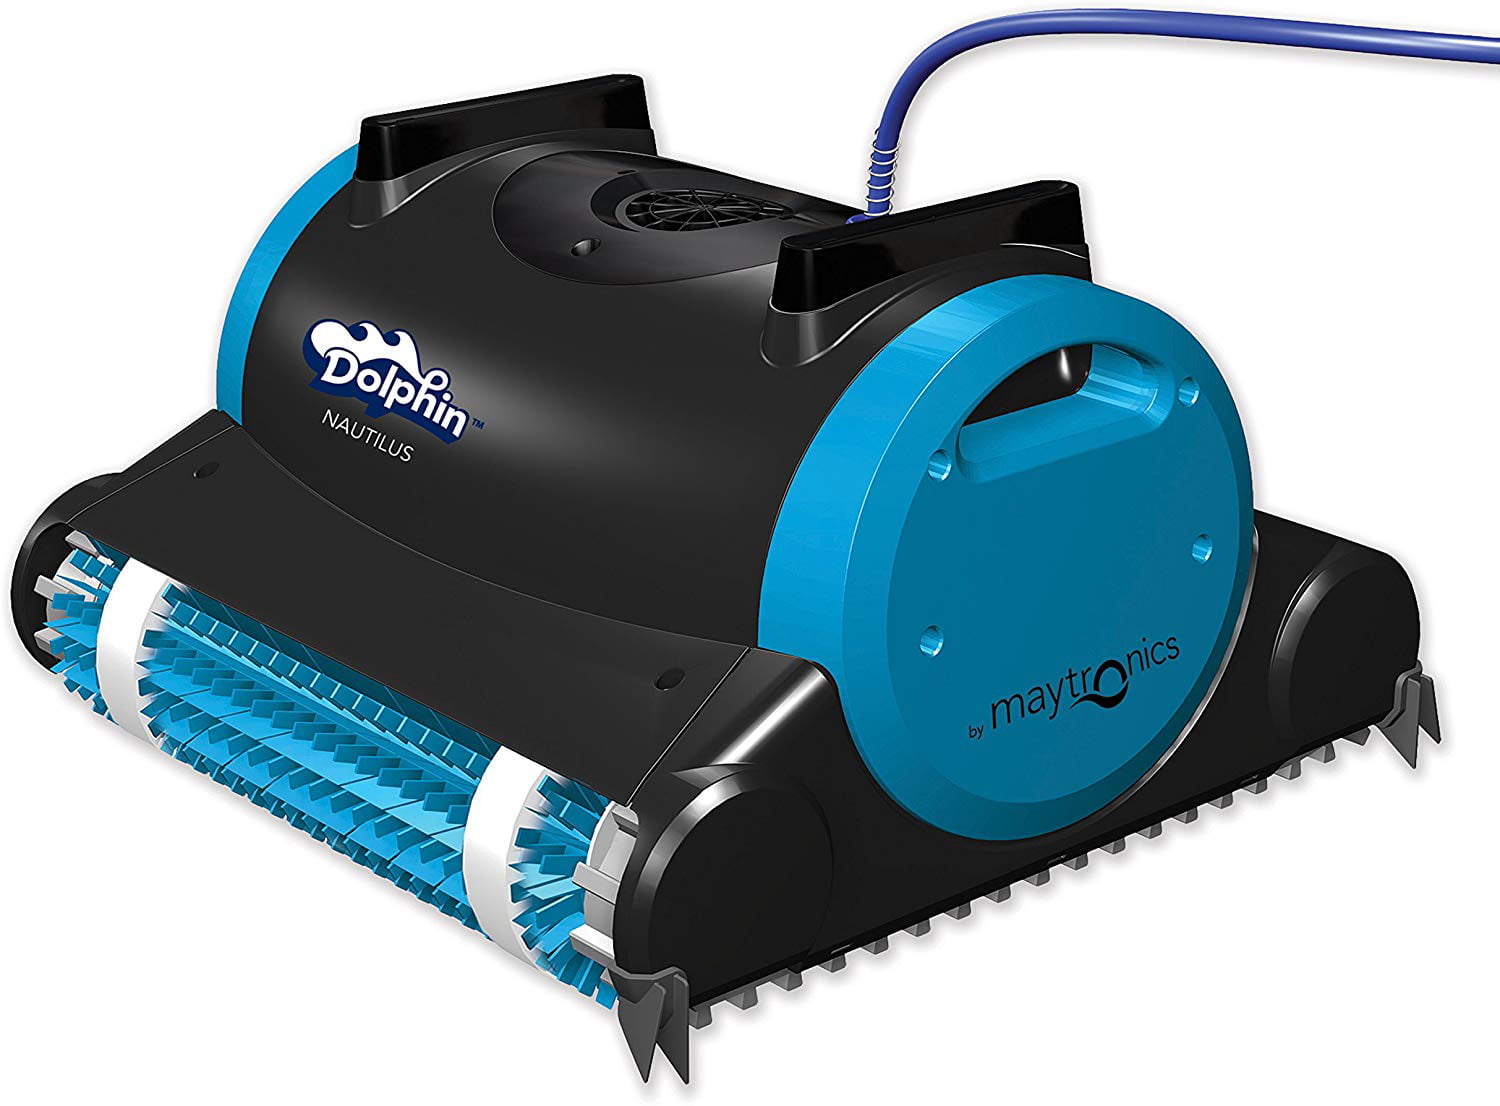 pool-cleaning-tools-dolphin-pool-style-robot-cleanerautomatic-above